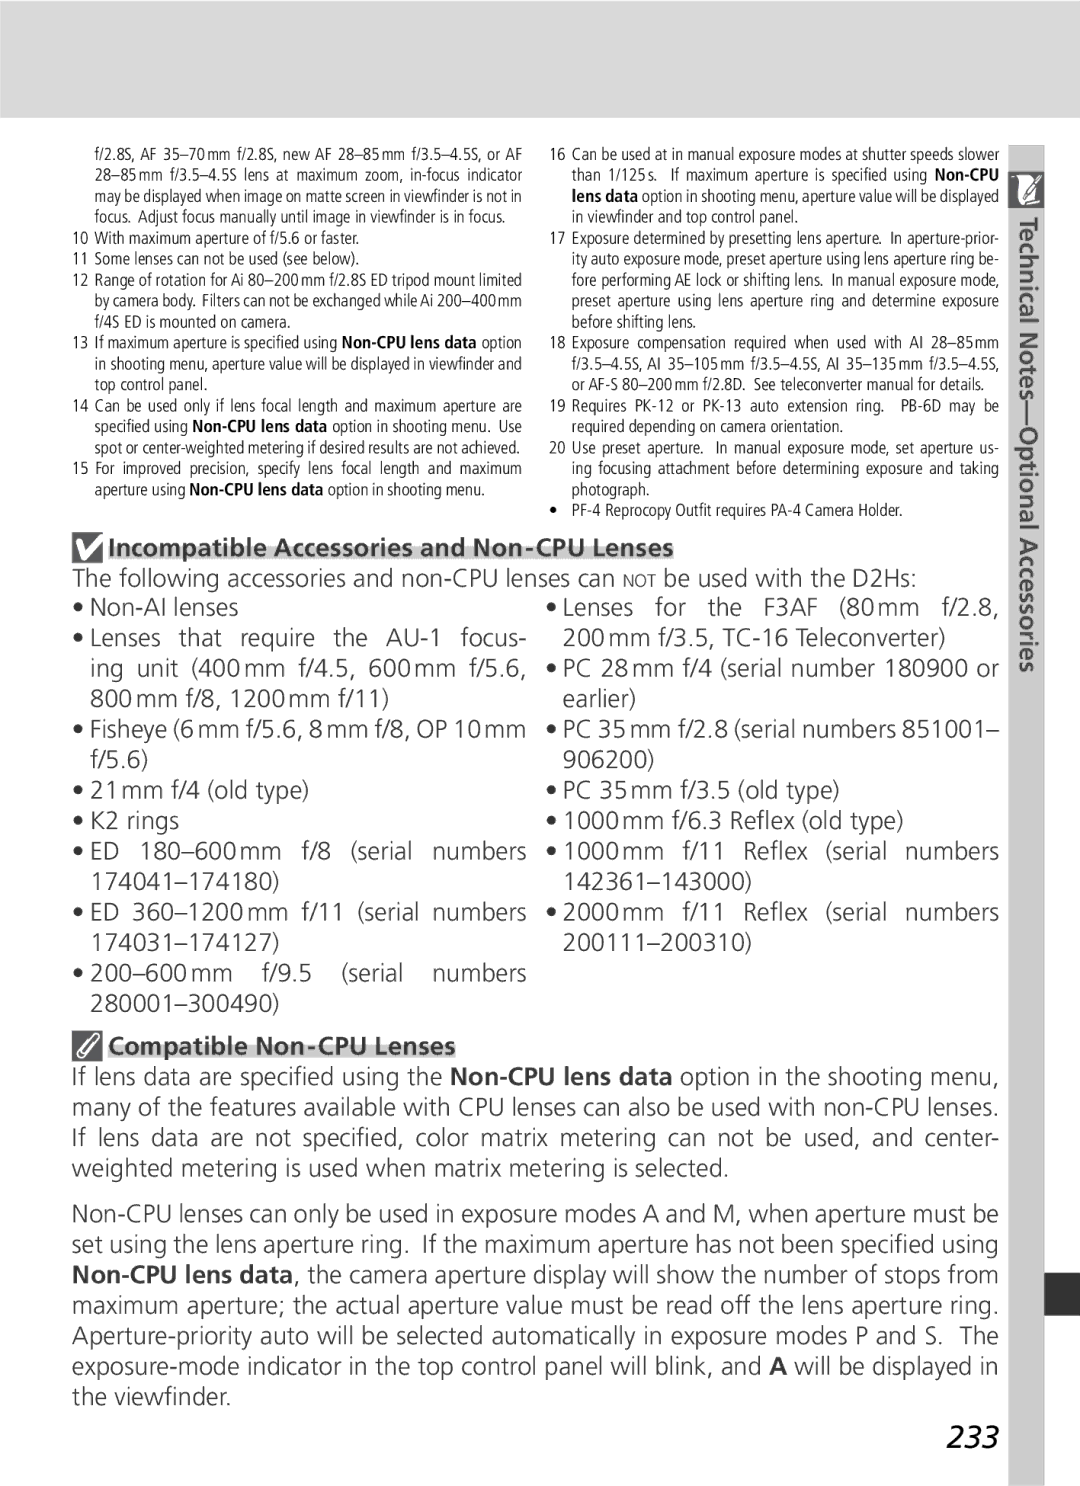 Nikon D2Hs manual 233, Incompatible Accessories and Non-CPU Lenses, Compatible Non-CPU Lenses 